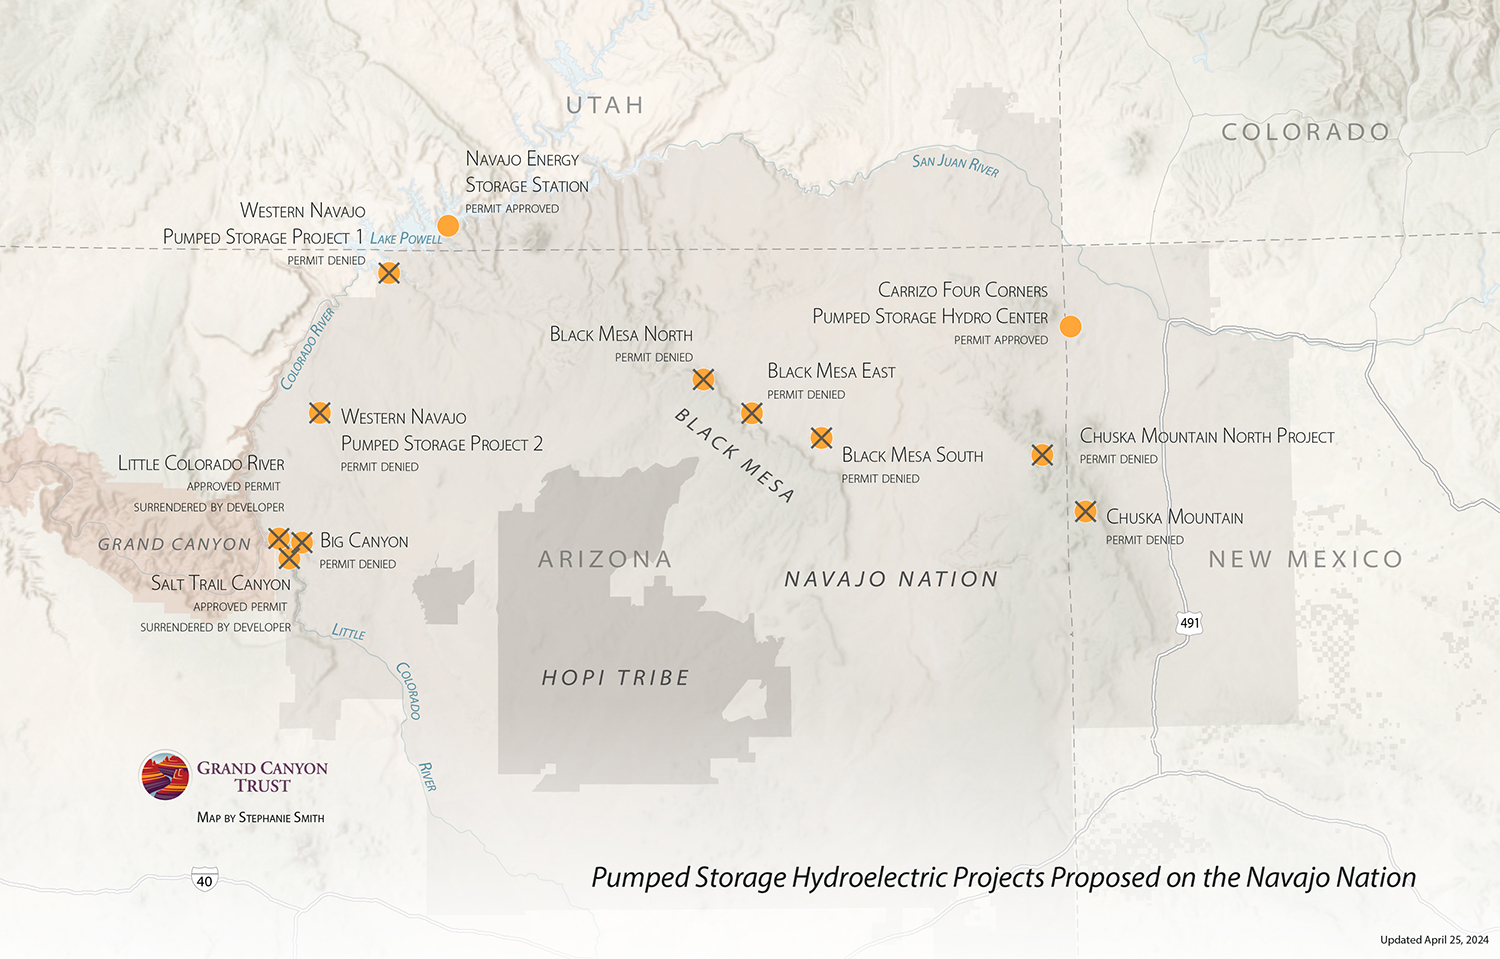 View a map of the projects.